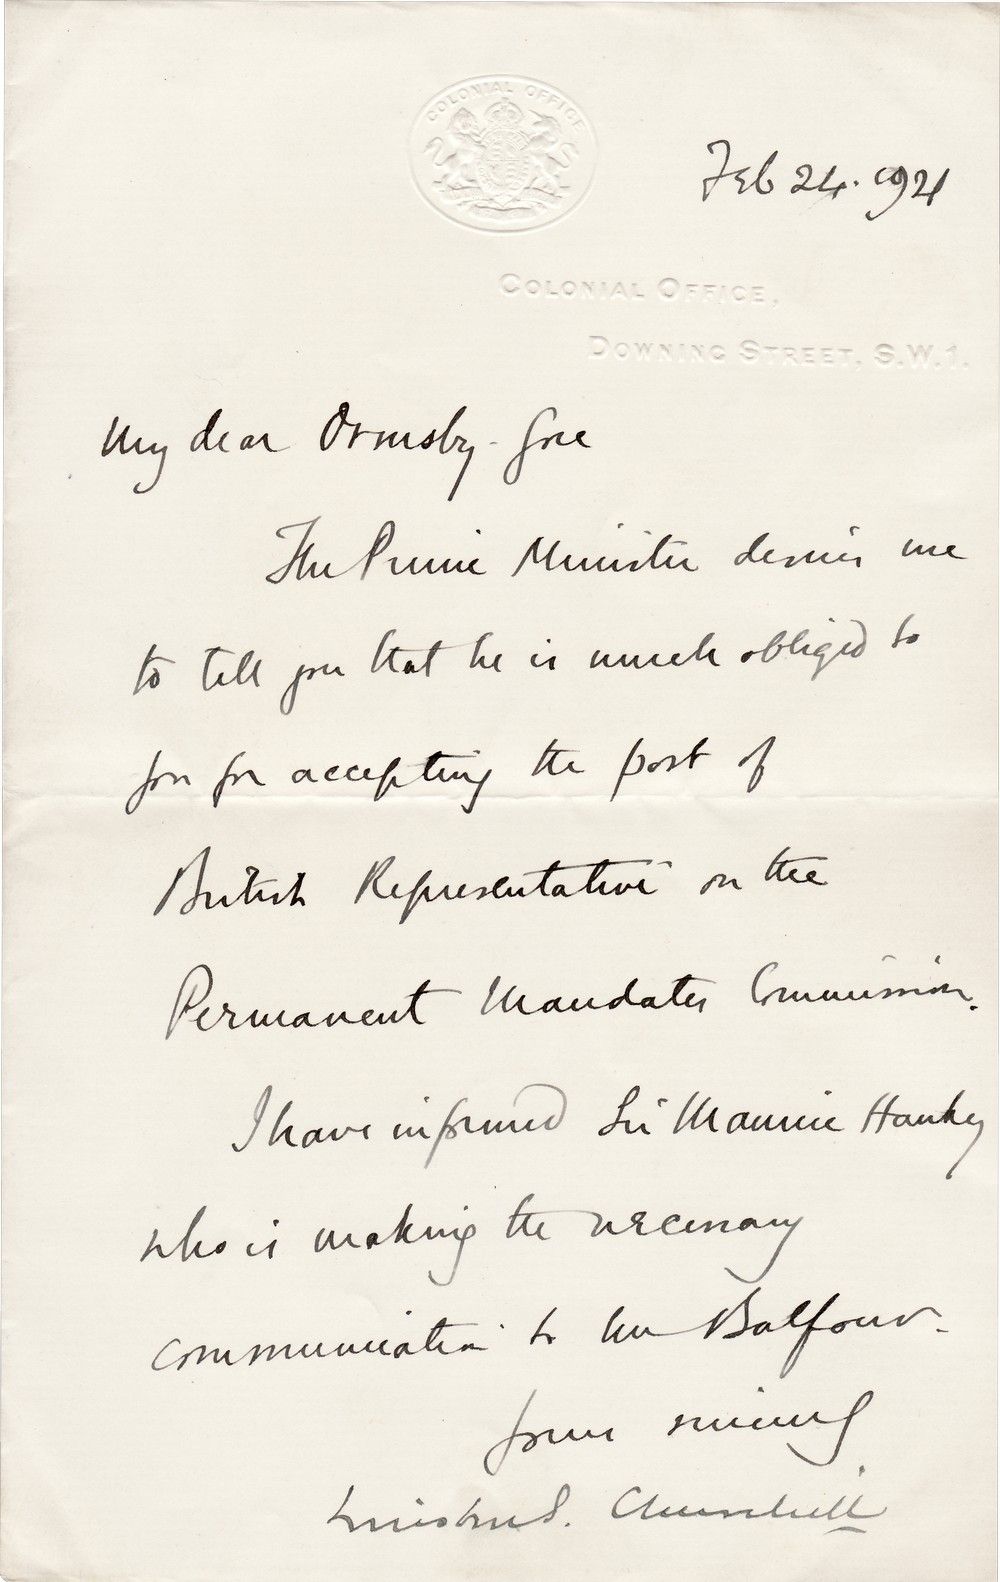 Winston Churchill Thanks Ormsby-Gore for Accepting Post to the Permanent Mandates Commission